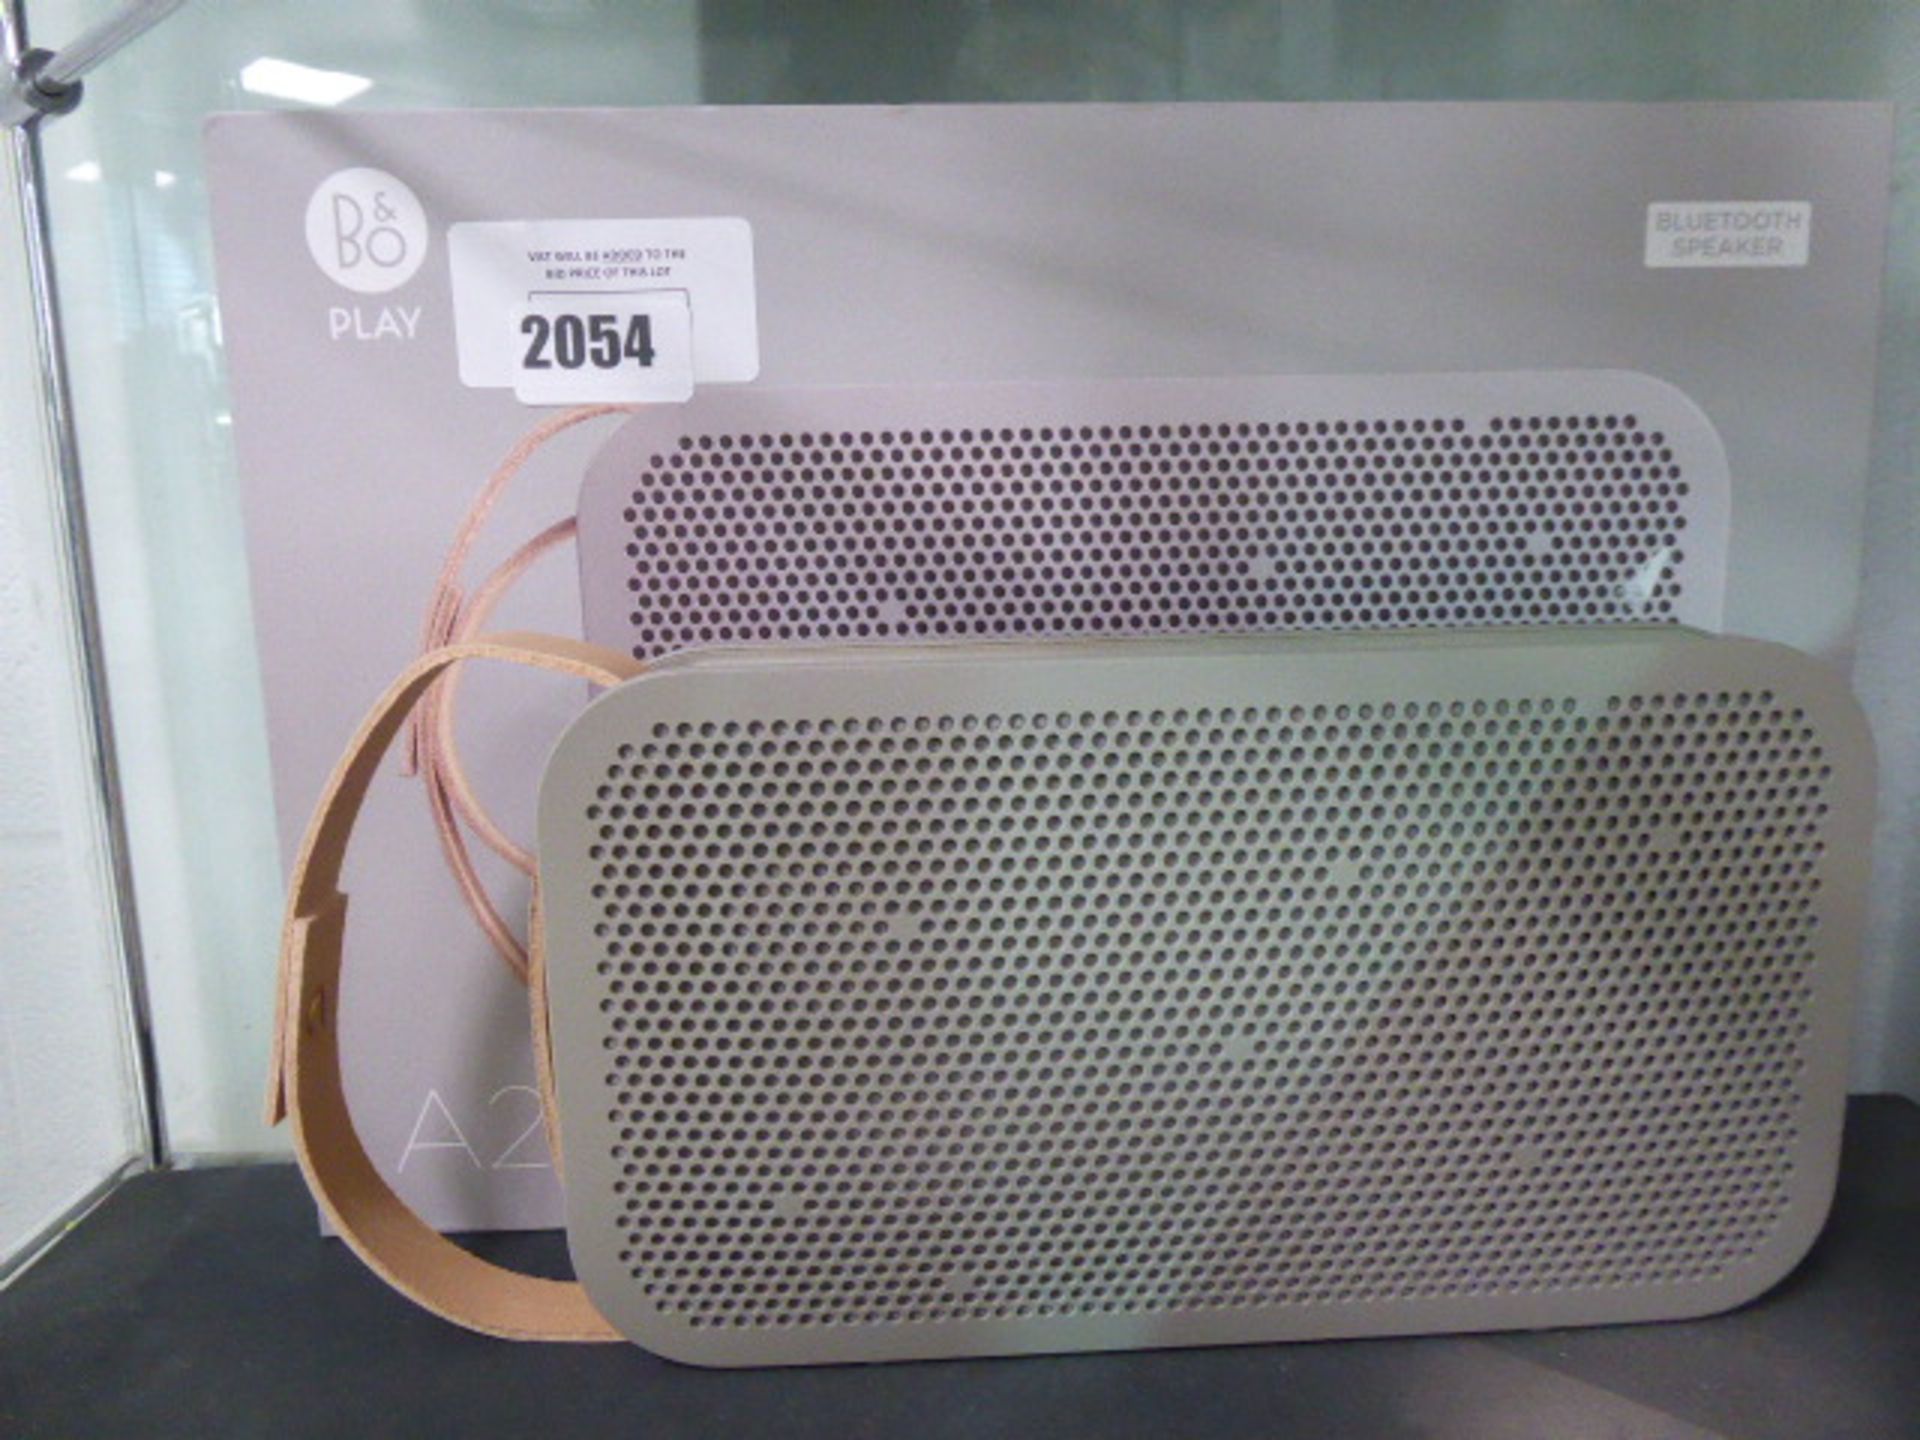 Bang & Olufsen Beoplay A2 portable bluetooth speaker with box